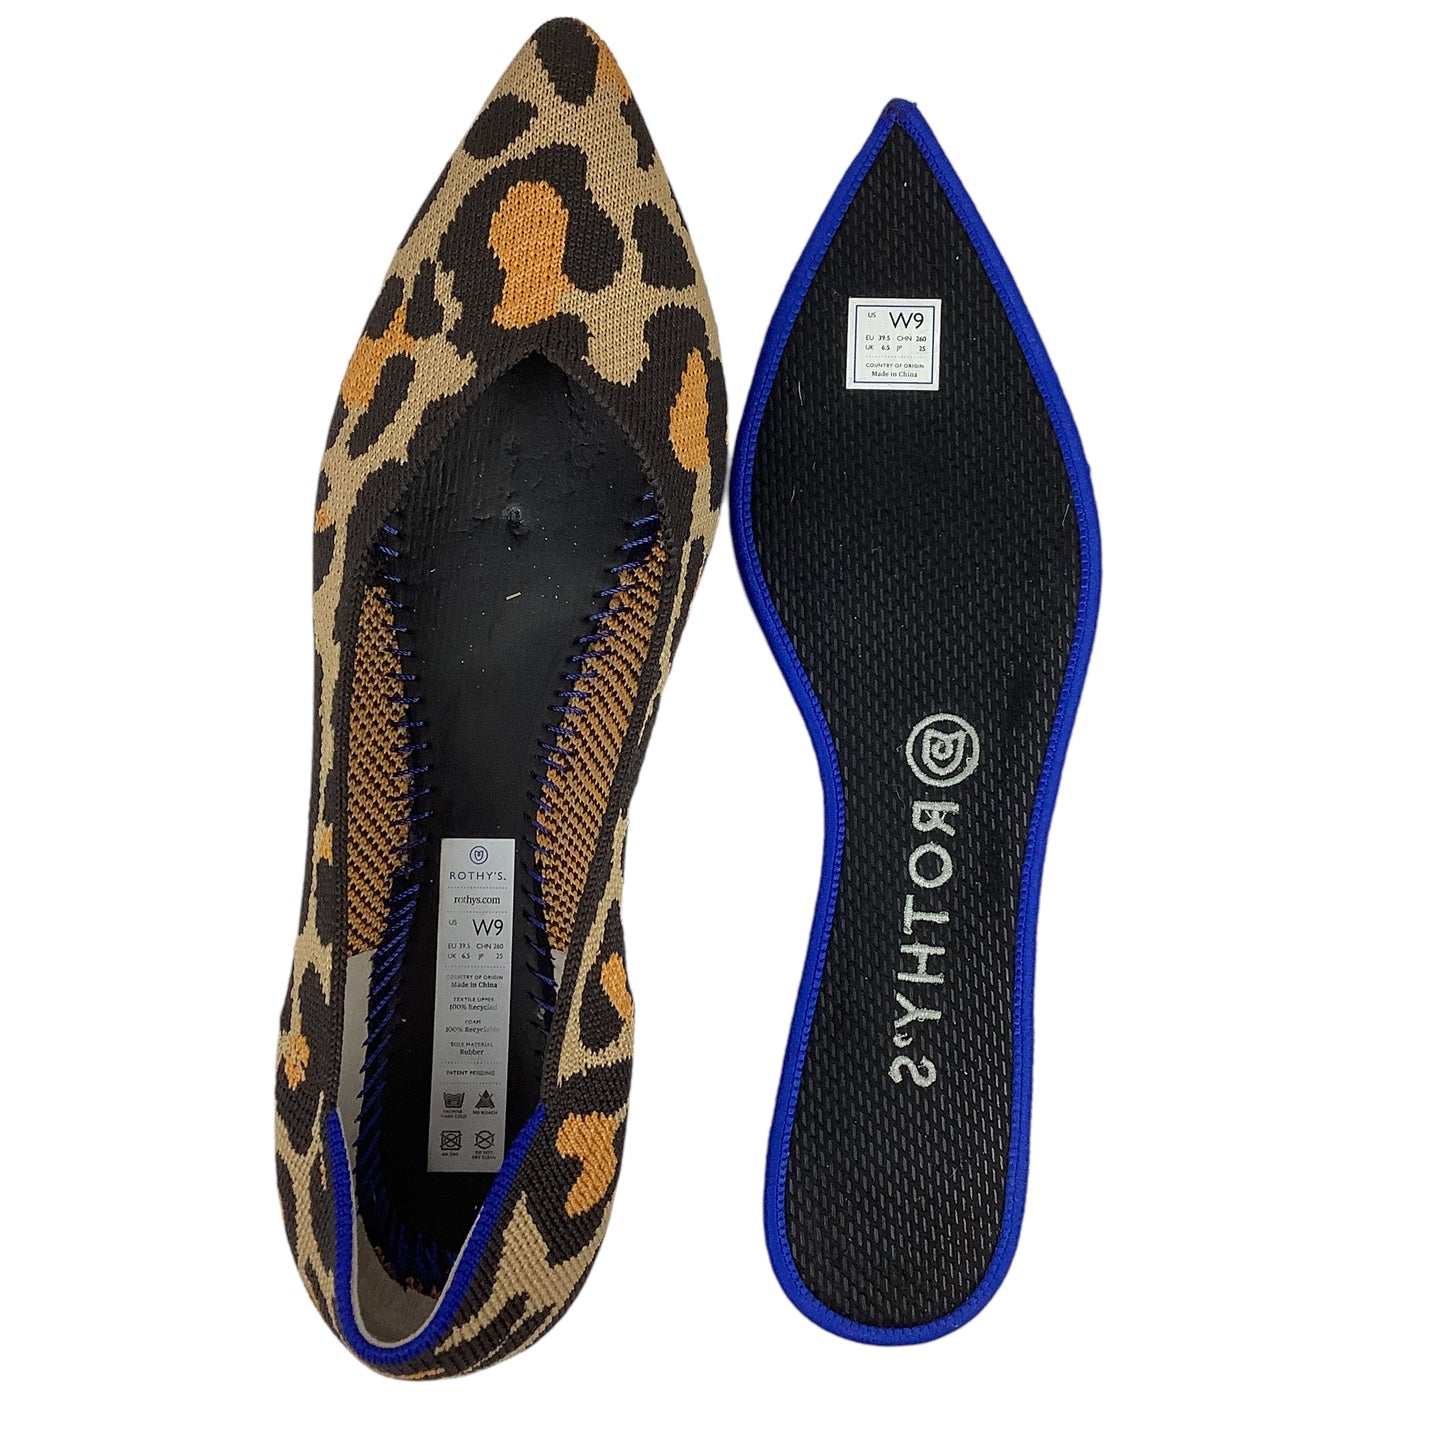 Shoes Designer By Rothys  Size: 9